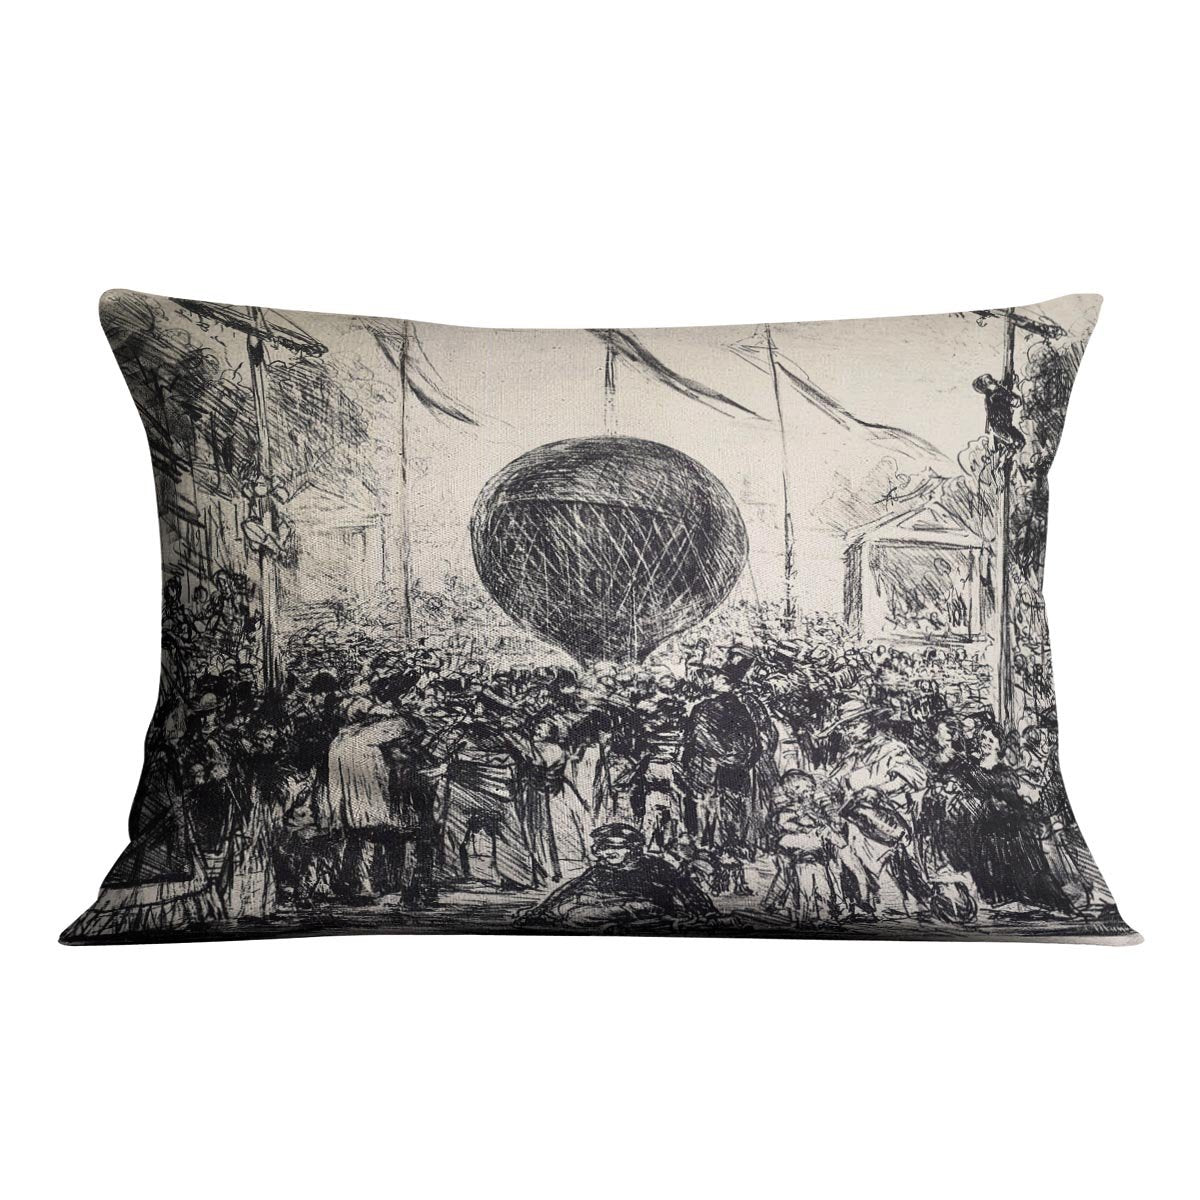 The Balloon by Manet Throw Pillow